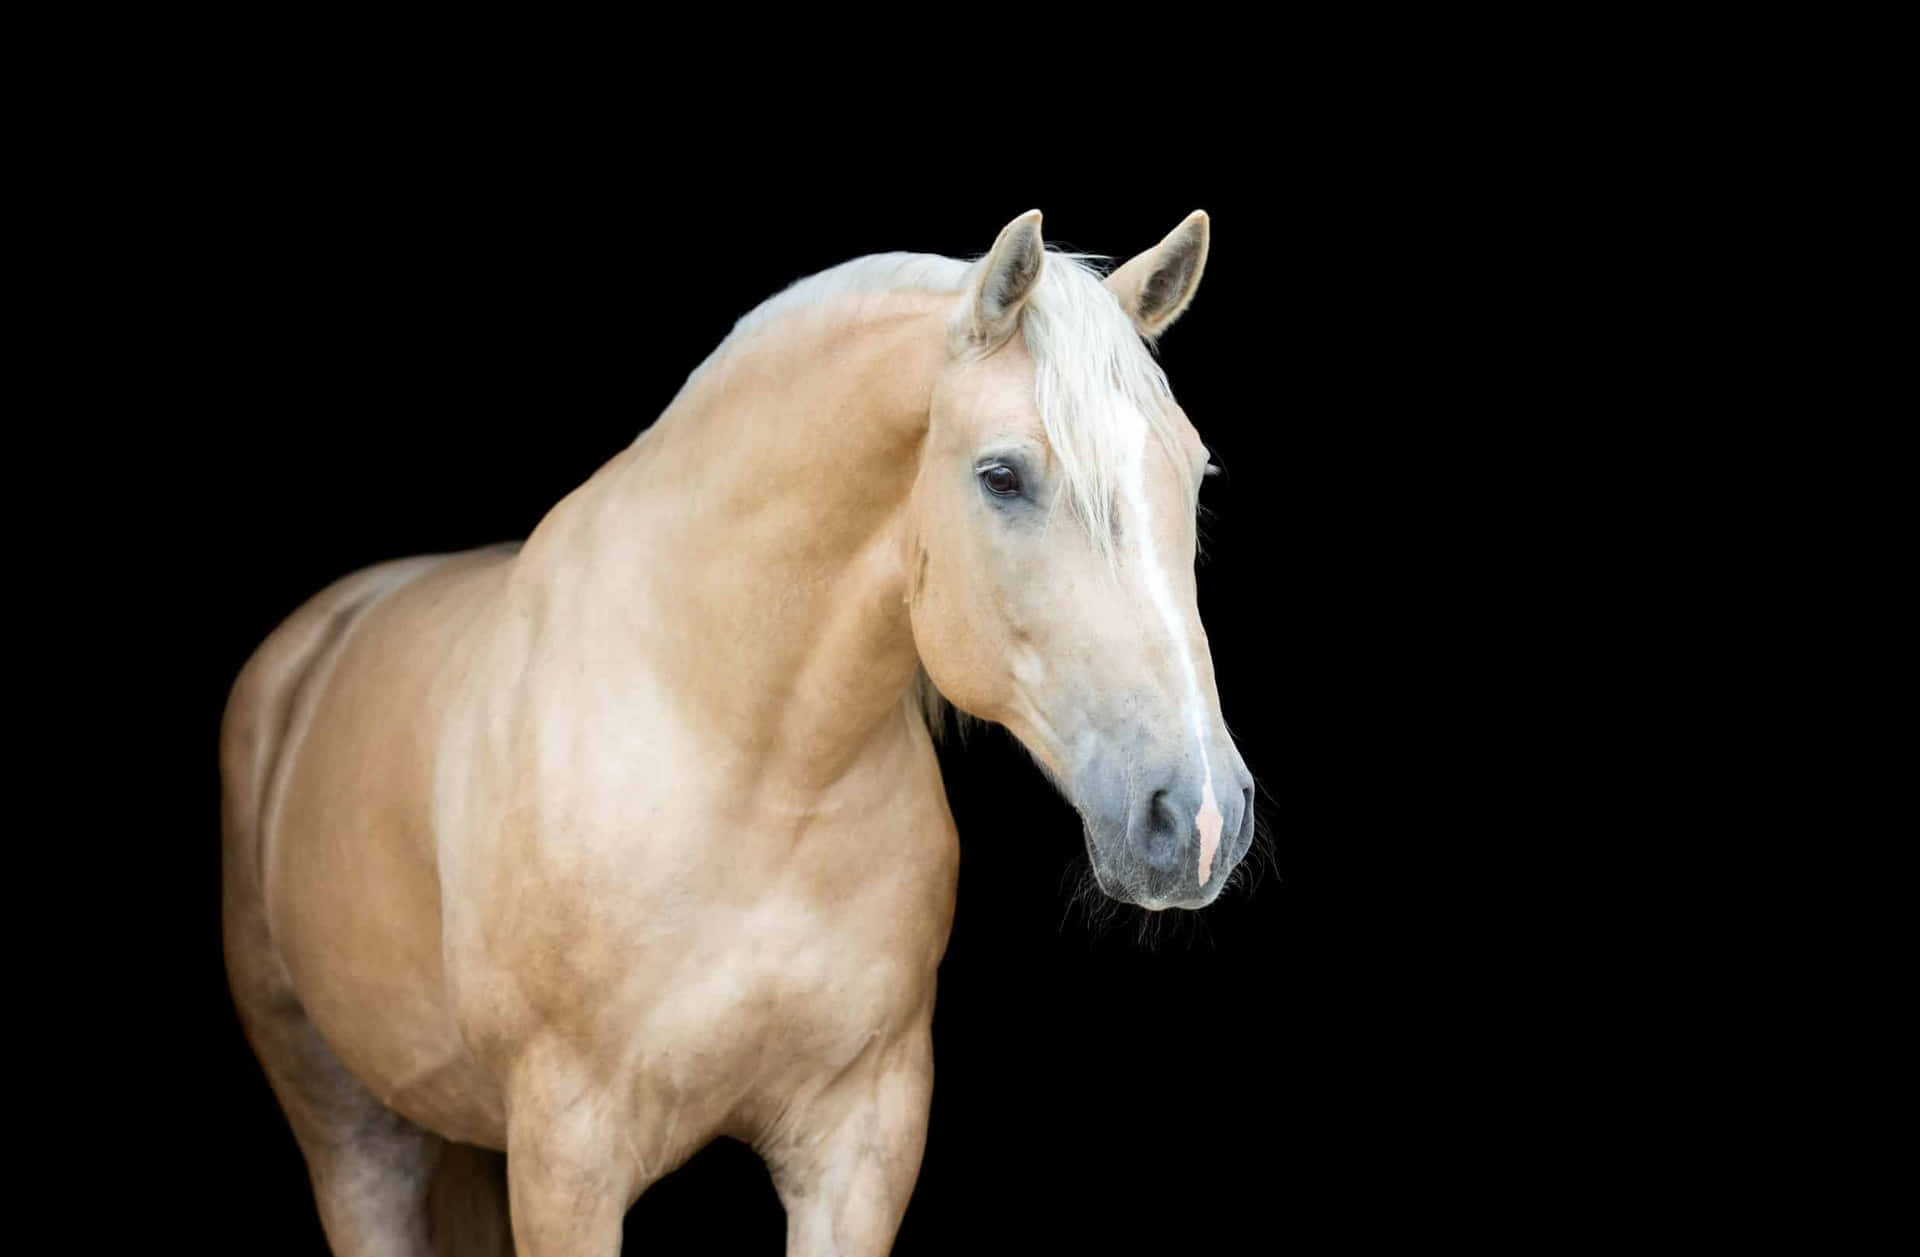 A Horse Is Standing On A Black Background